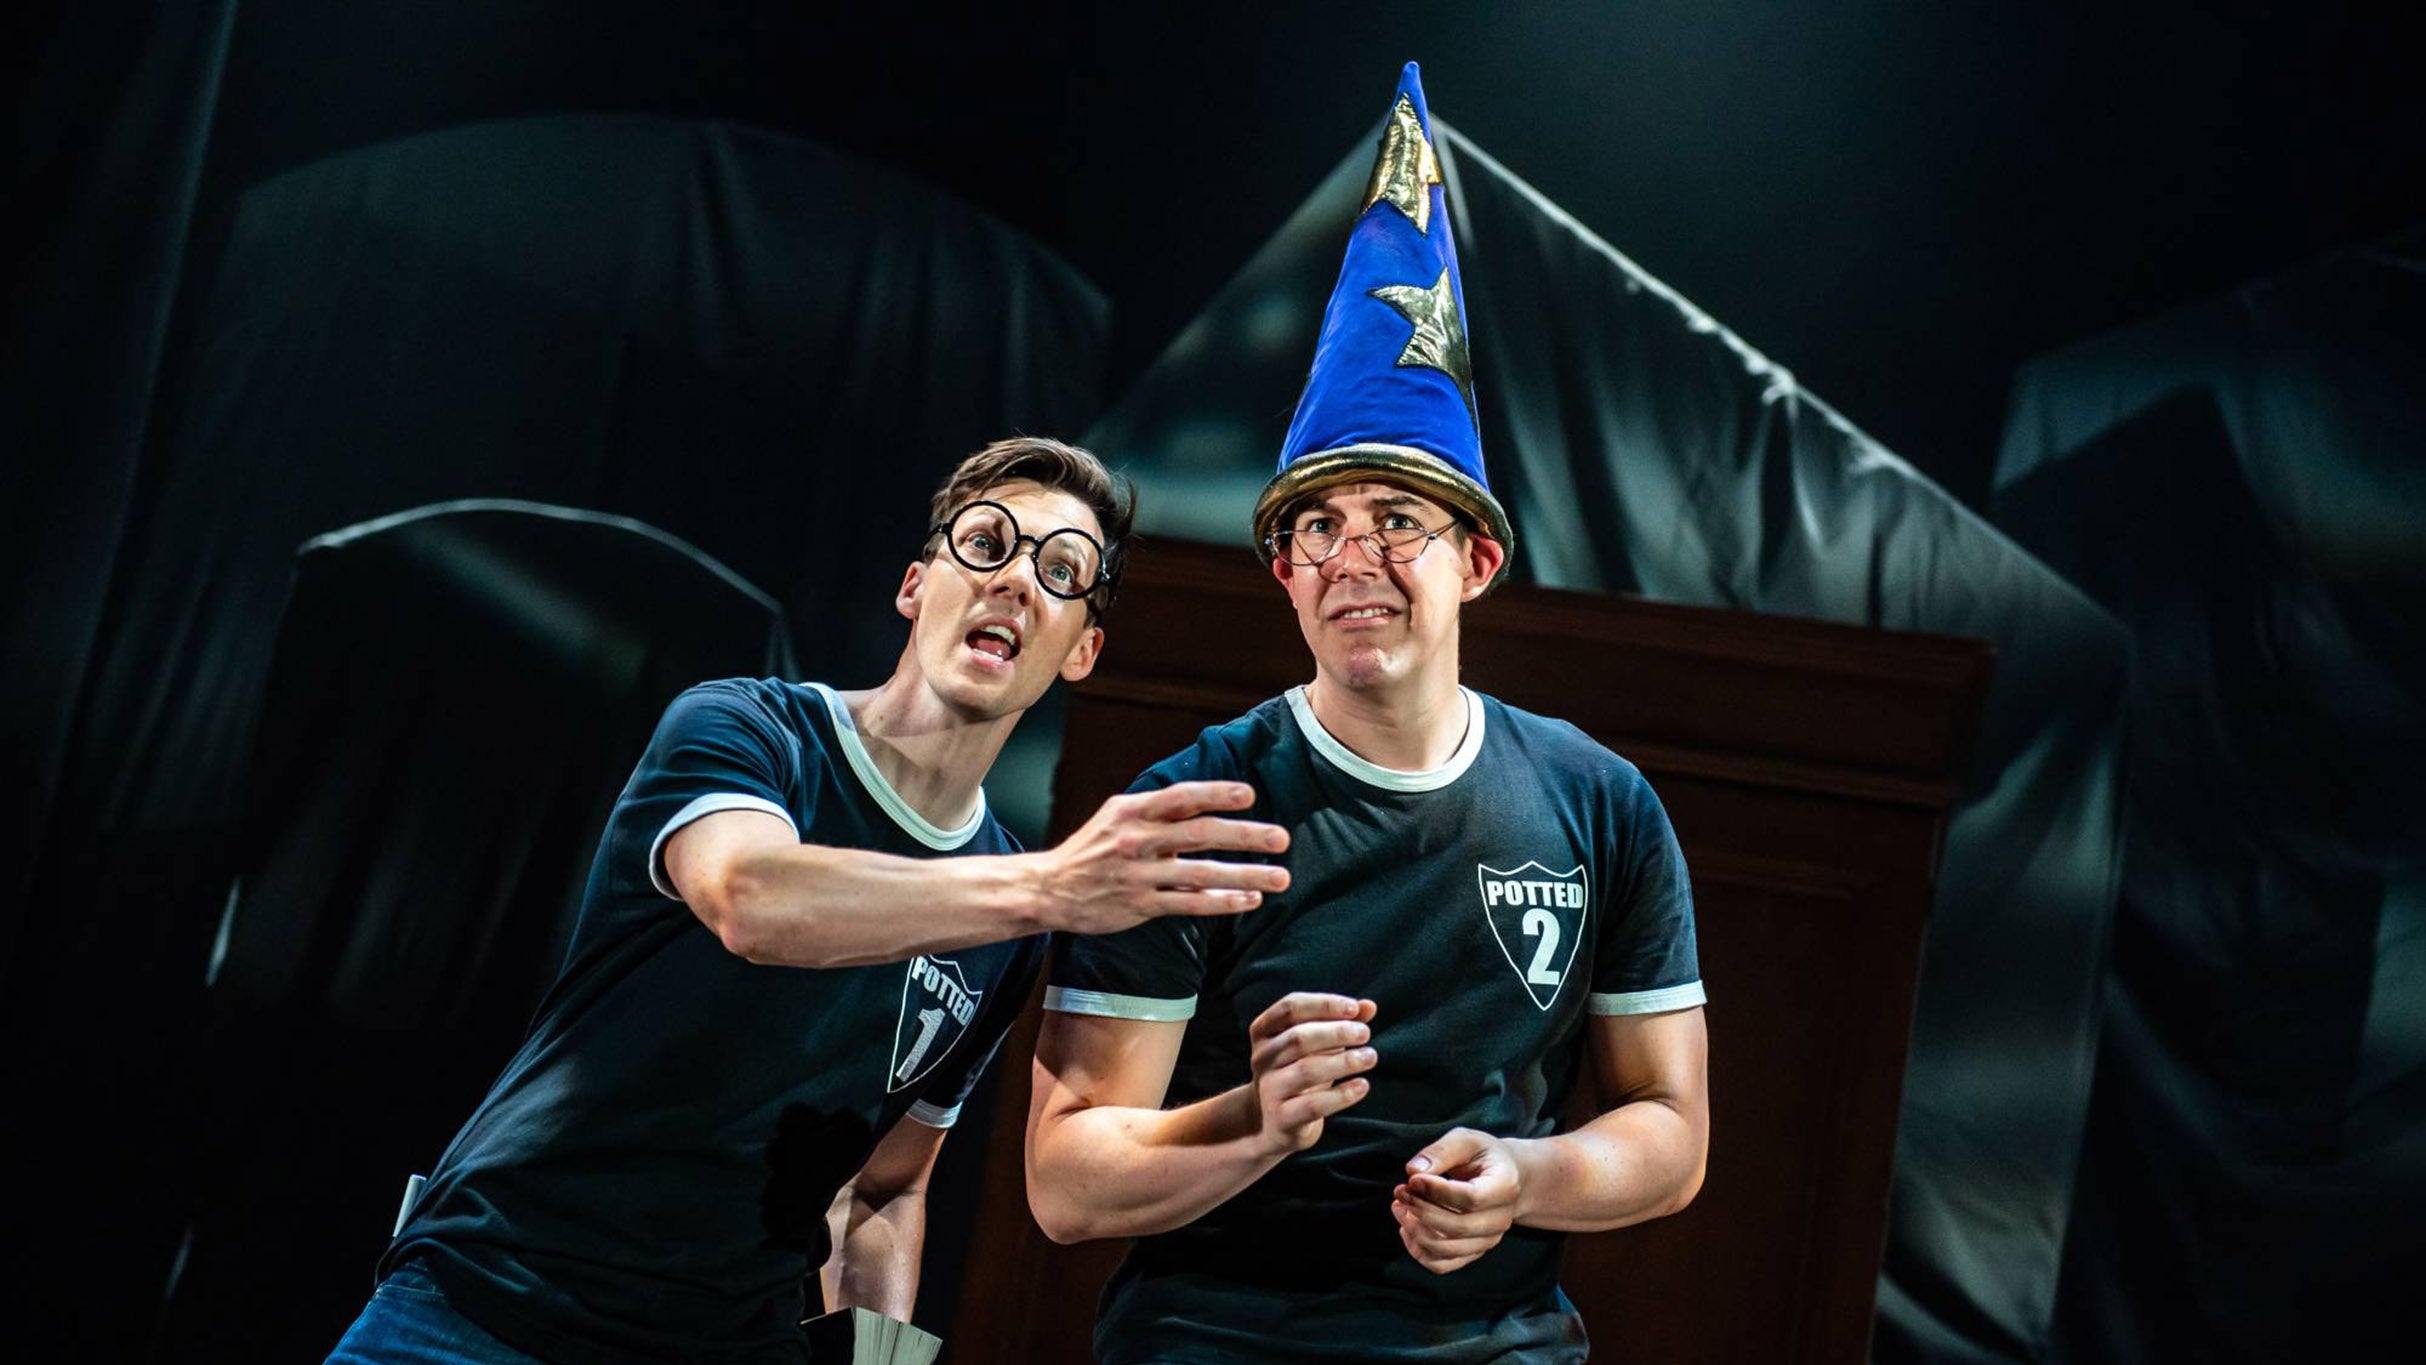 Potted Potter in Toronto promo photo for Cyber Monday / Black Friday  presale offer code